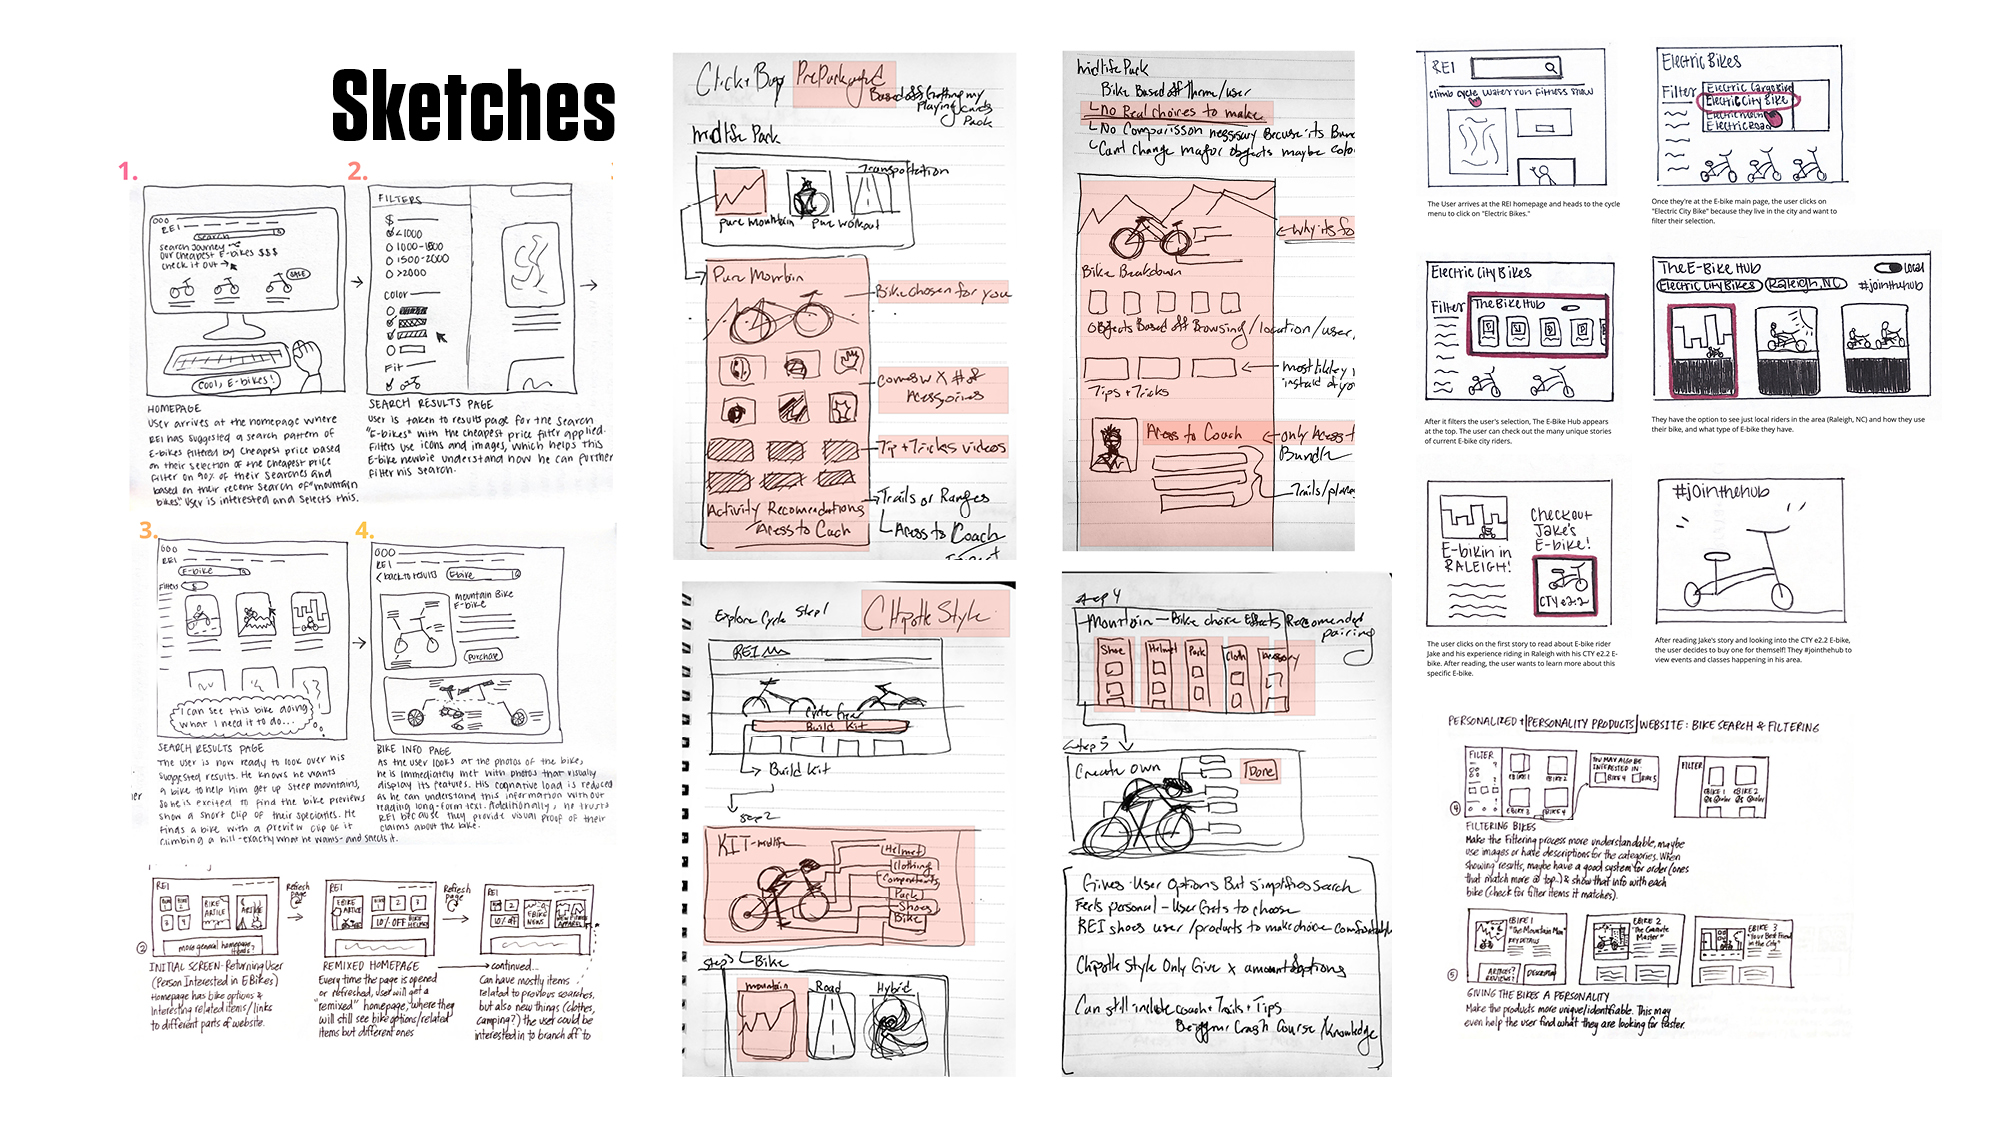 lots and lots of early sketches created during the ideation phase of the project